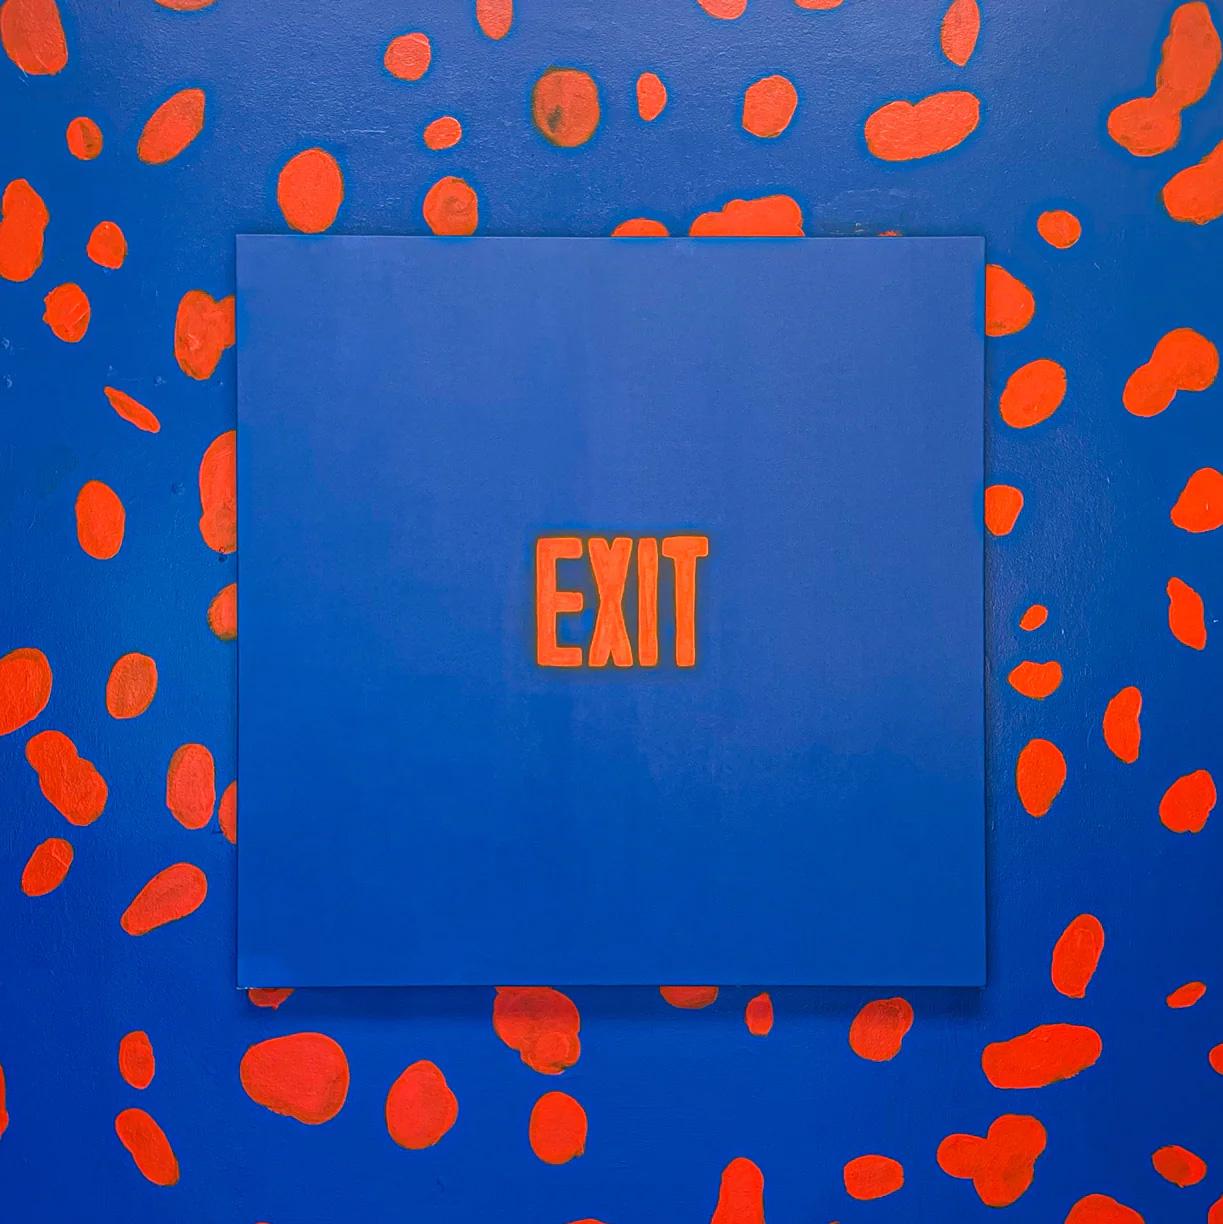 Ceren Arslan Abstract Painting - EXIT by Exit Ceren, Represented by Tuleste Factory